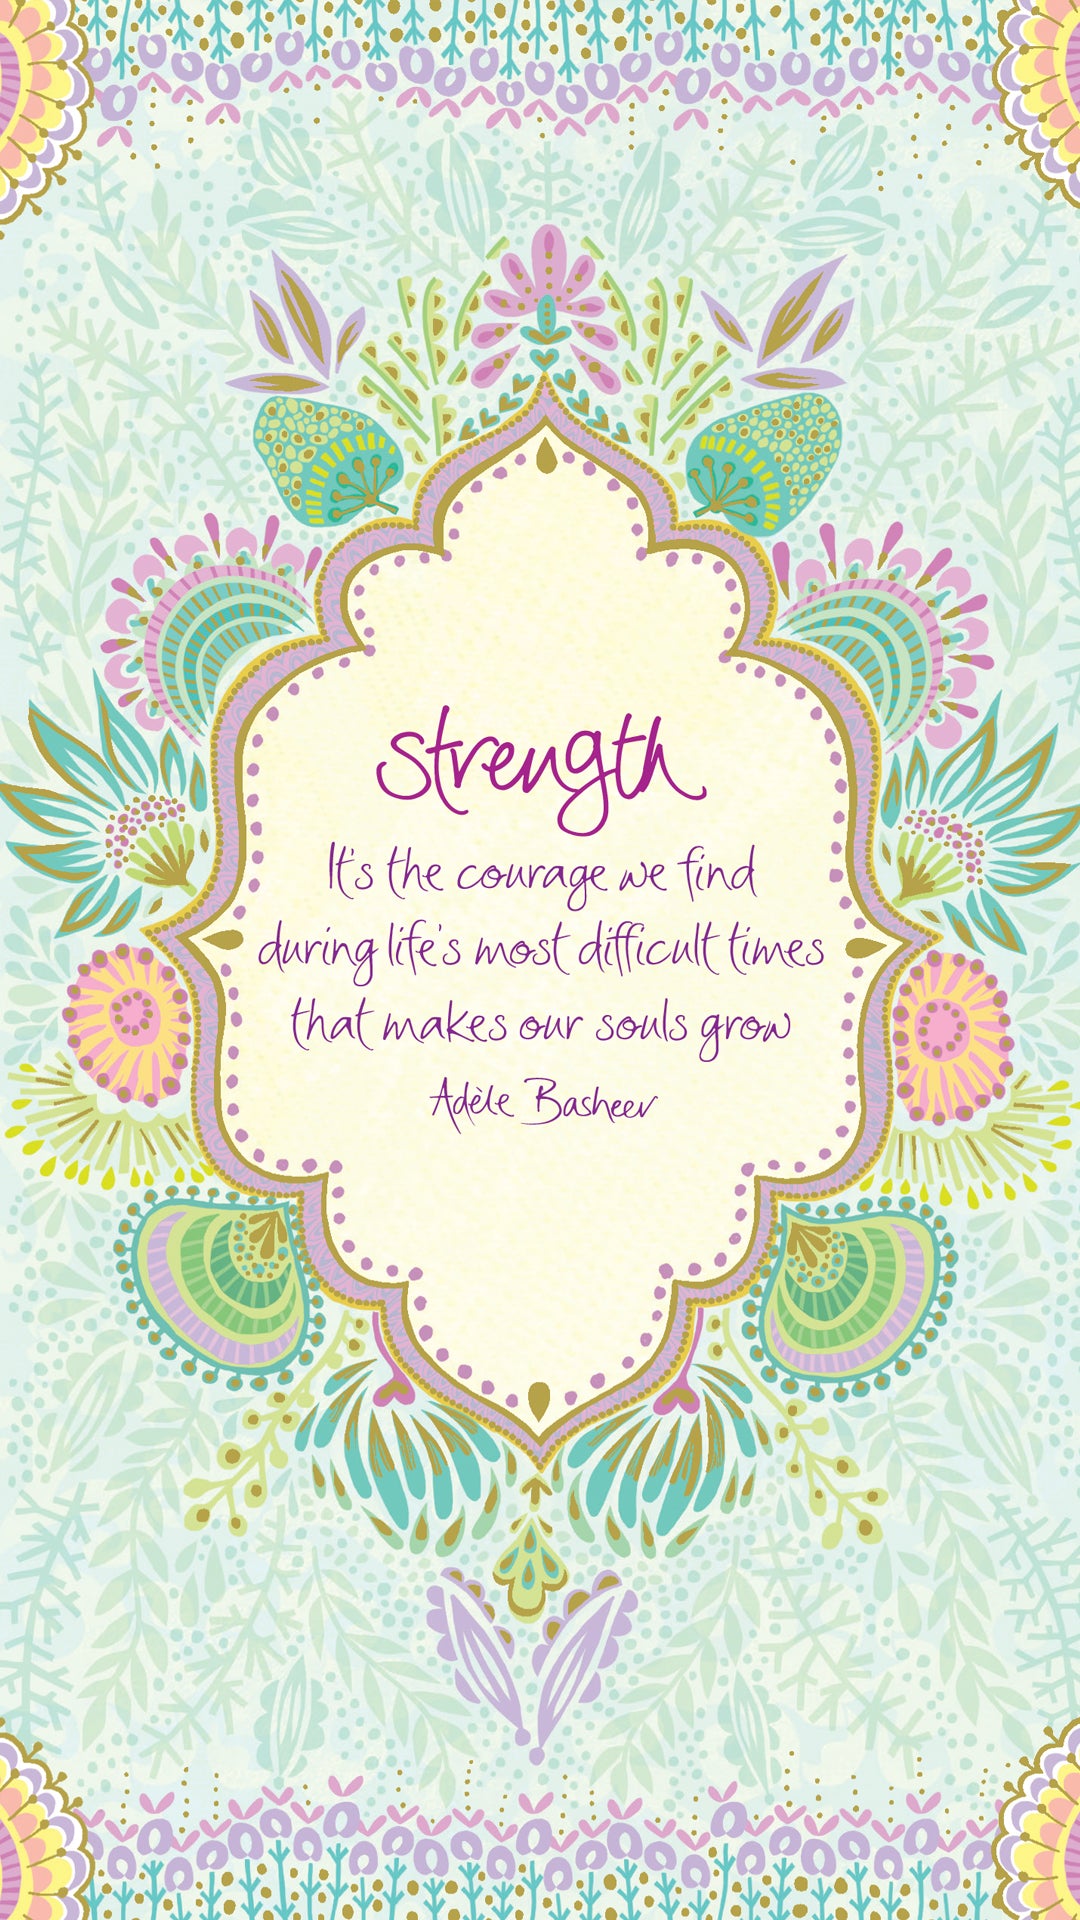 Intrinsic Strength Inspirational Quote by Adele Basheer - Digital Wallpaper